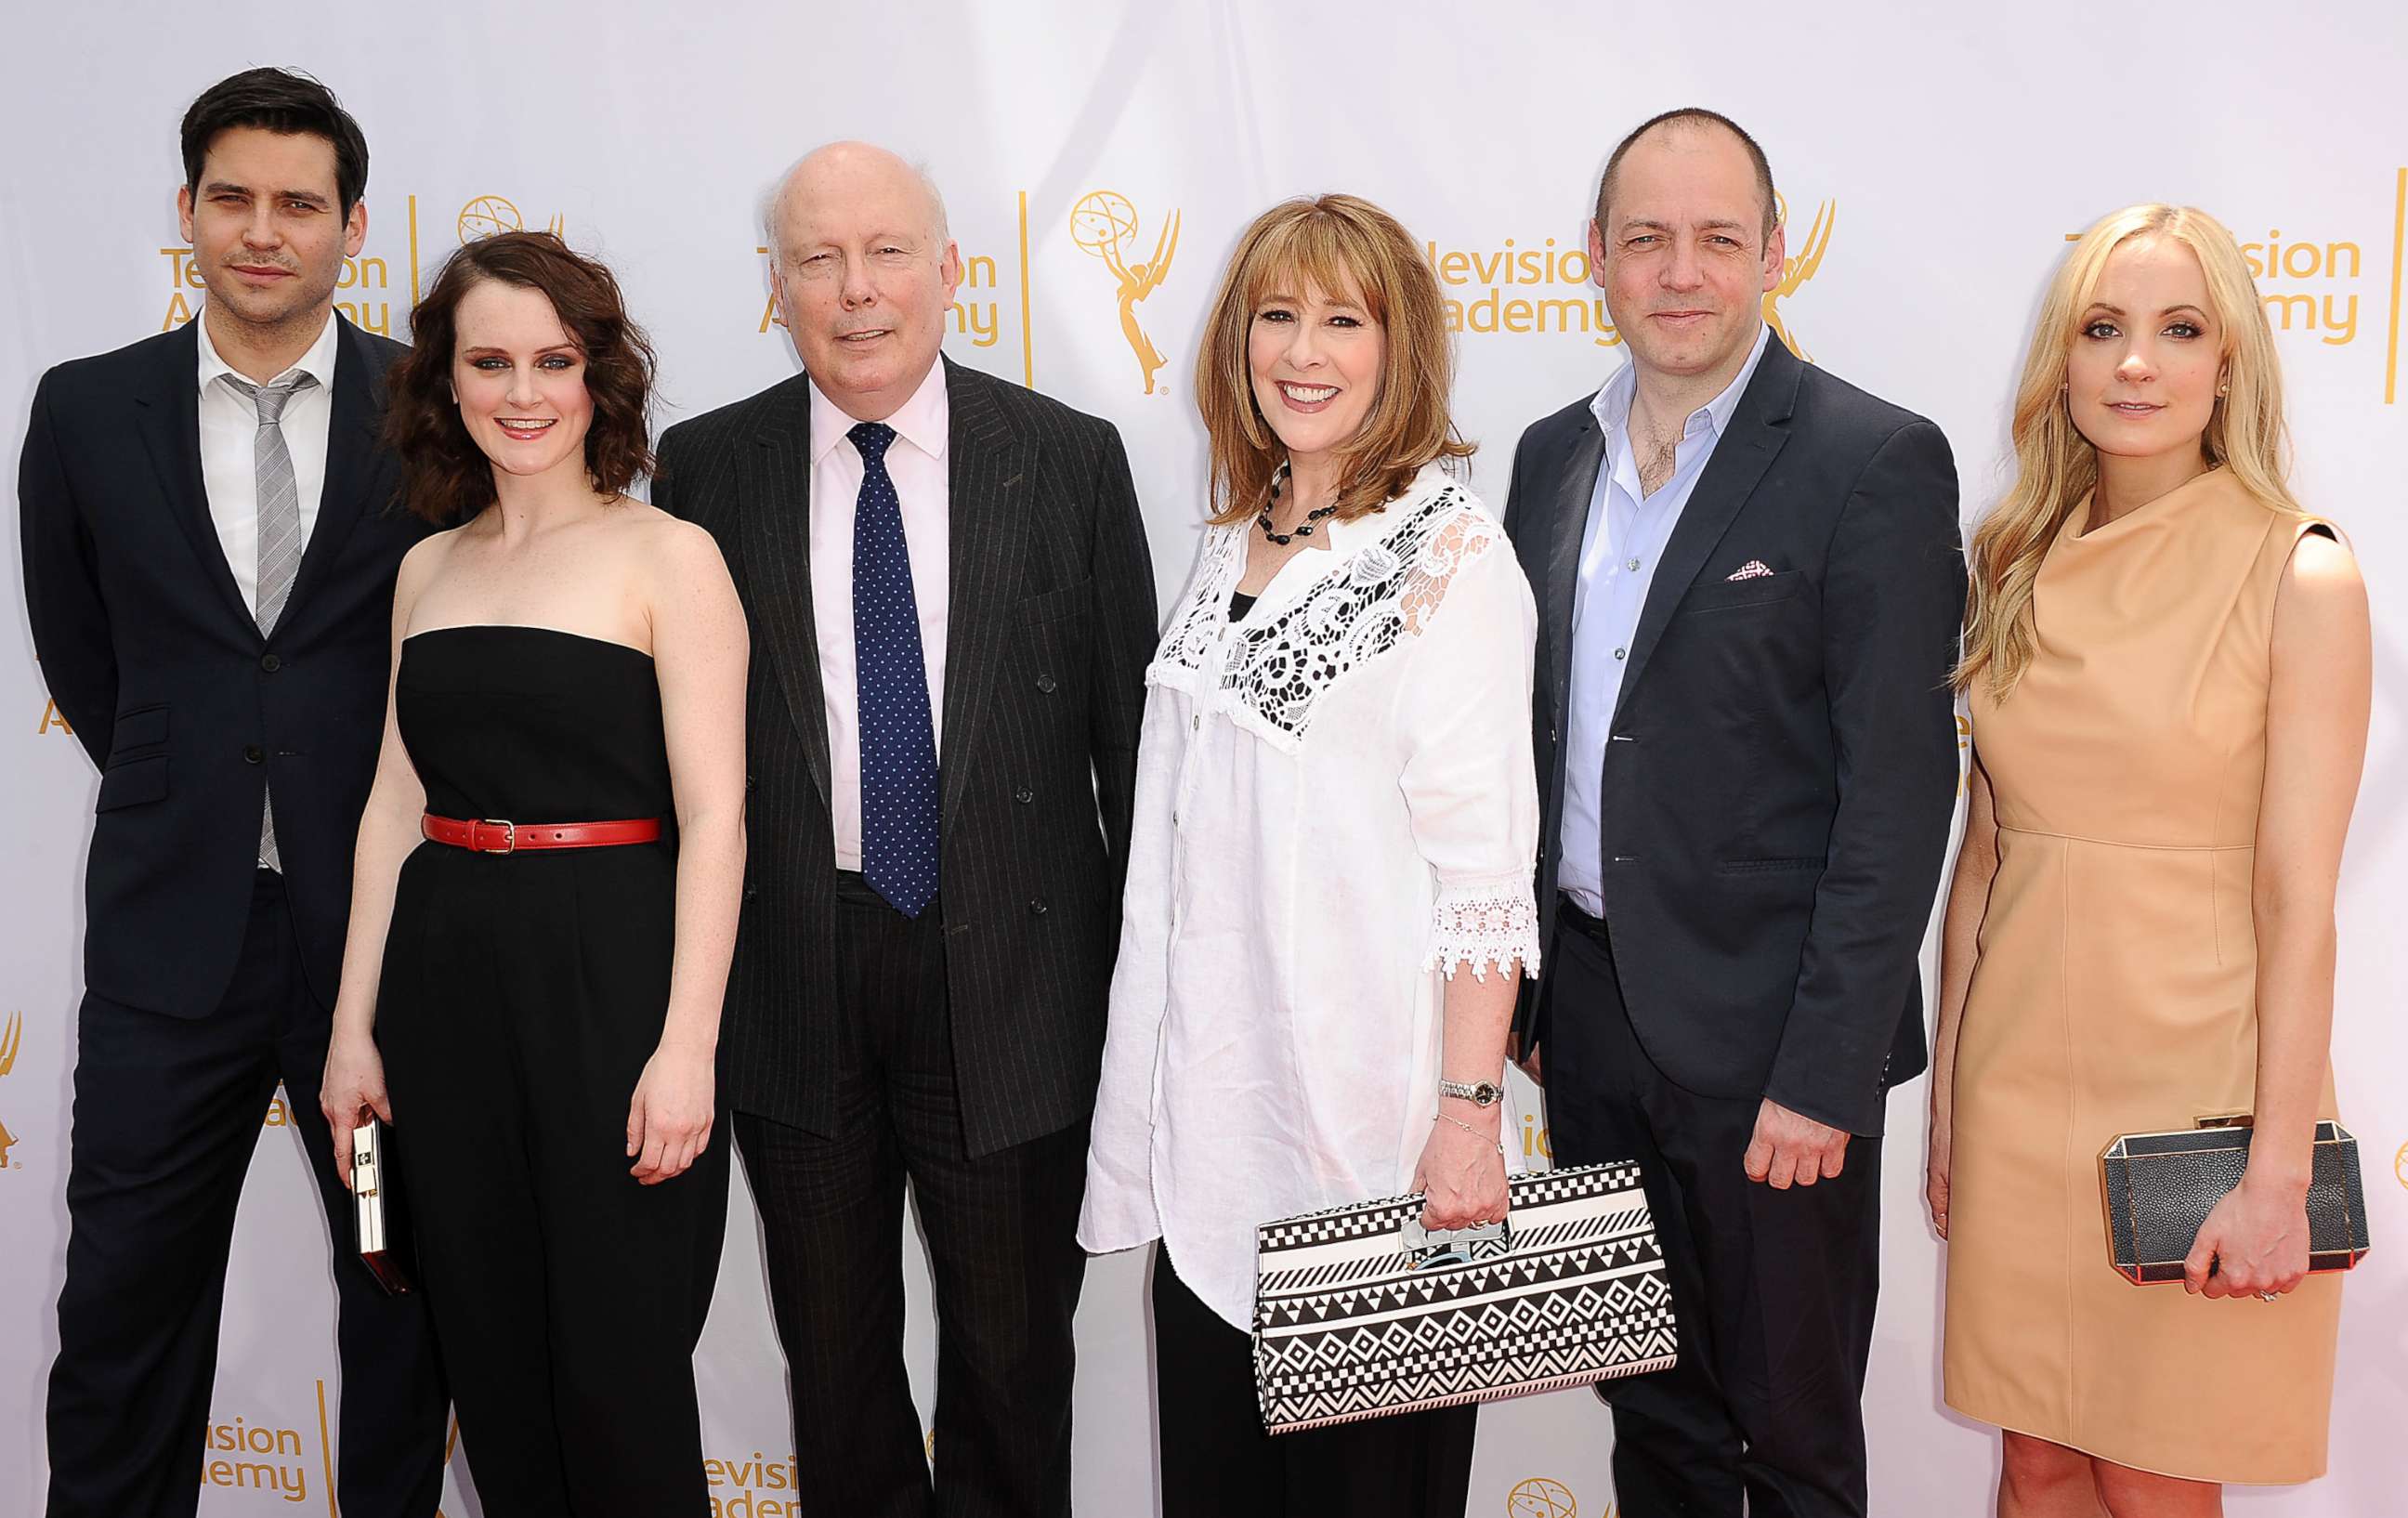 PHOTO: Rob James-Collier, Sophie McShera, Julian Fellowes, Phyllis Logan, Gareth Neame and Joanne Froggatt attend a "Downton Abbey" event at Paramount Studios on May 3, 2014 in Hollywood, Calif.